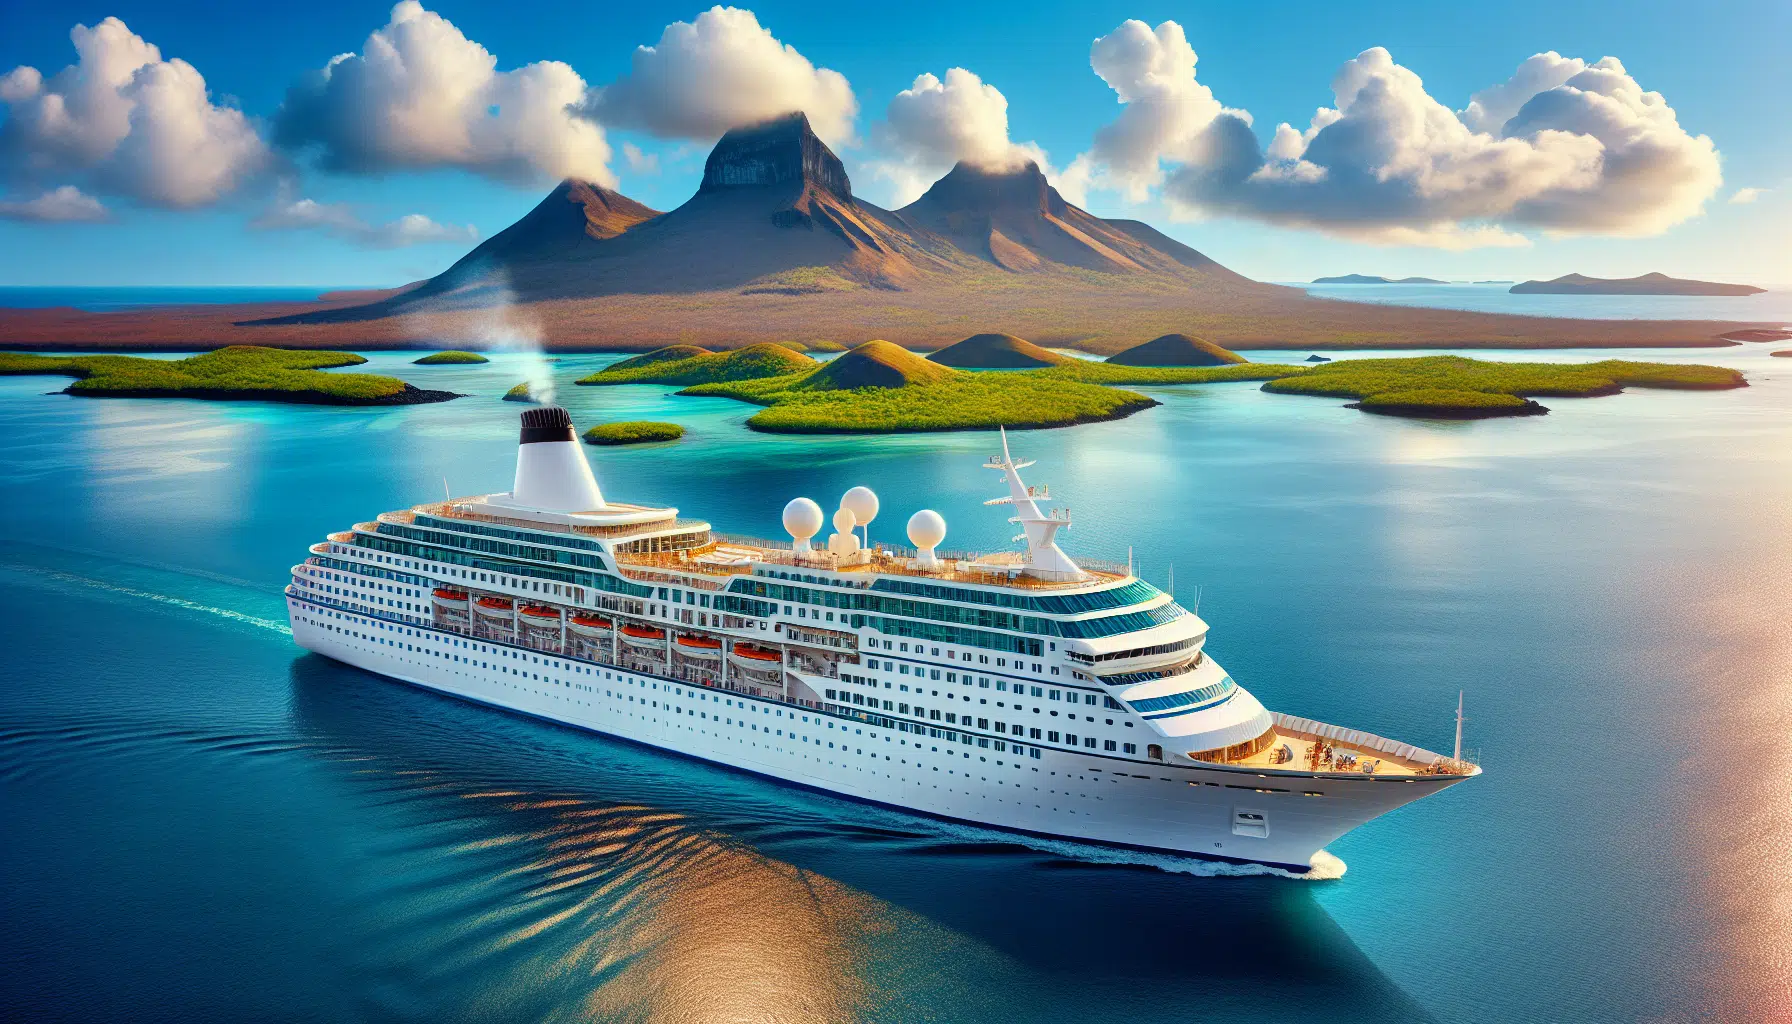 Luxury Galapagos cruise ship with the stunning Galapagos Islands in the background